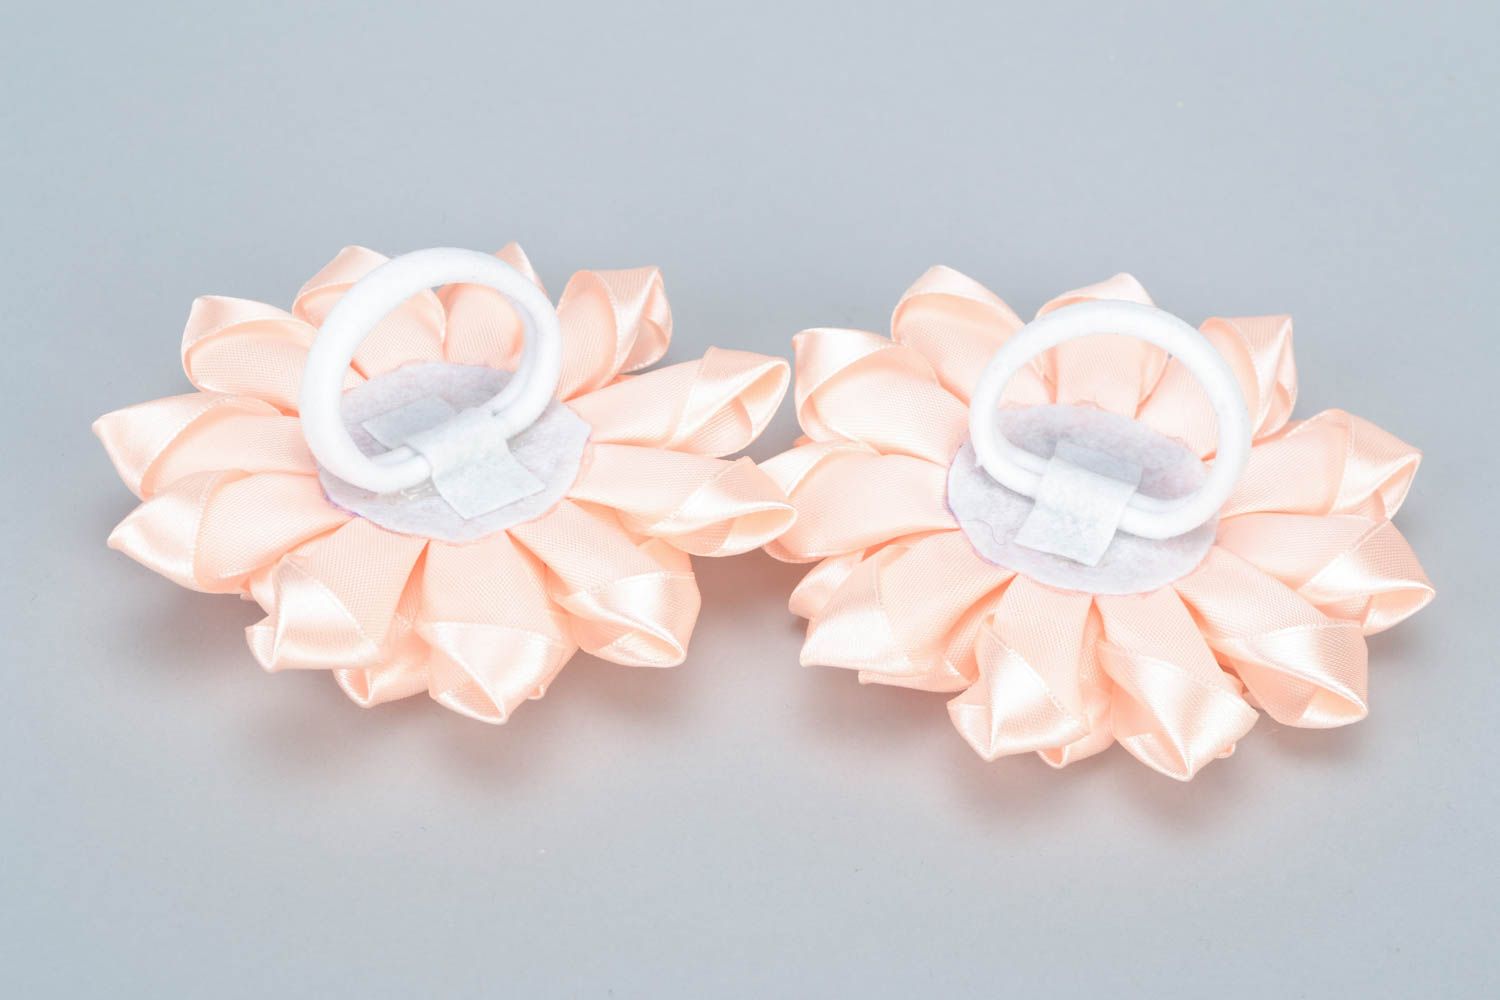 Gentle pink handmade scrunchies made of satin ribbons kanzashi technique 2 pieces photo 4